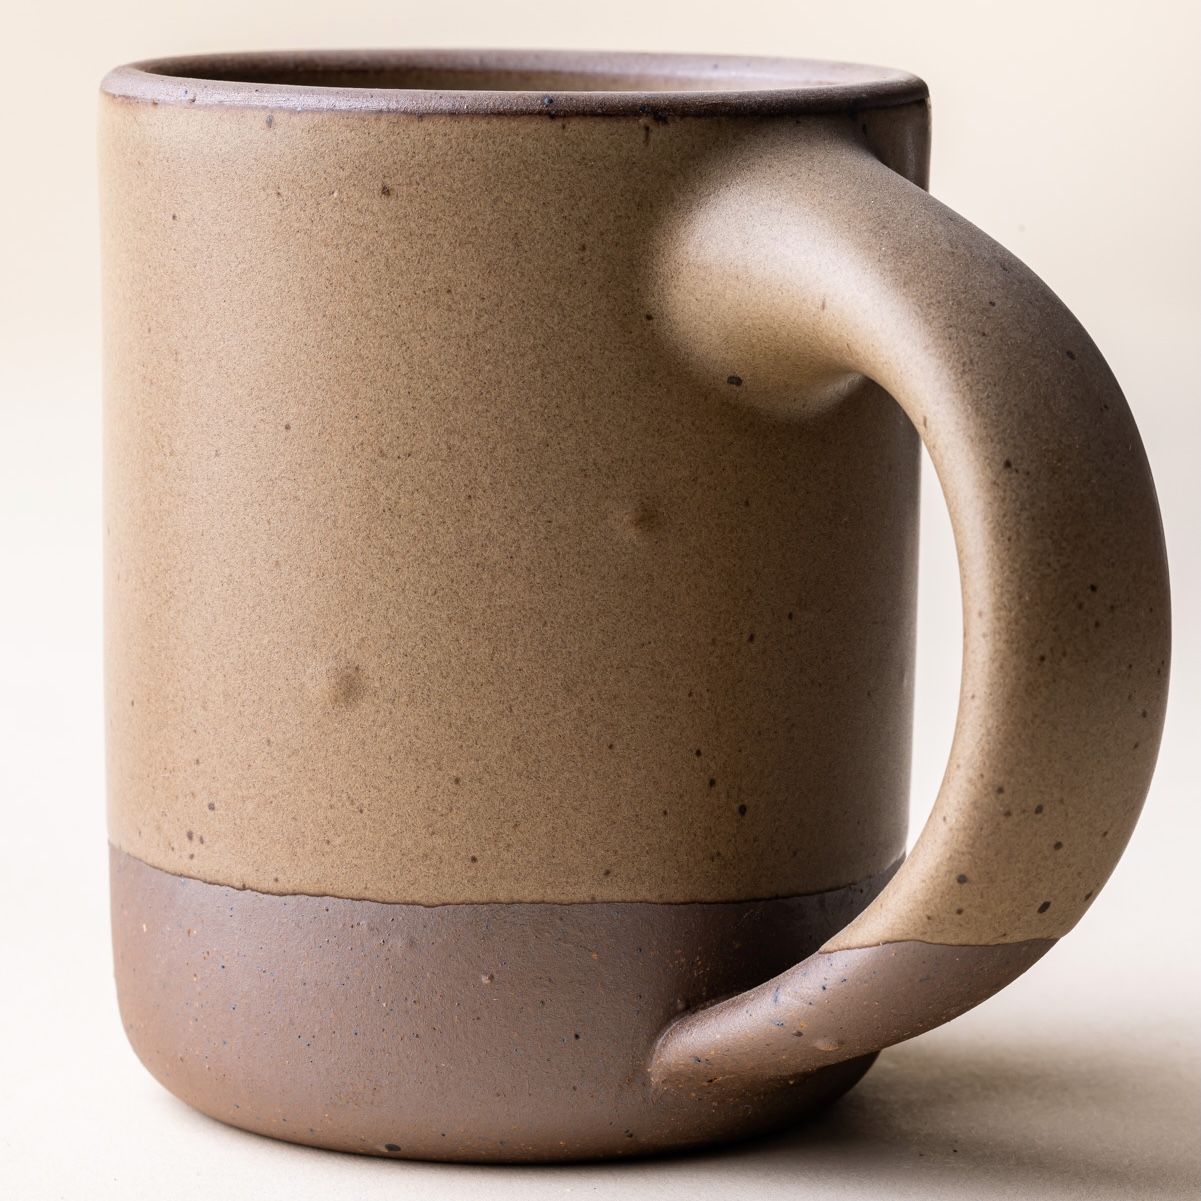 A ceramic mug has little bubbles underneath revealed on the glaze - also known as bloating.